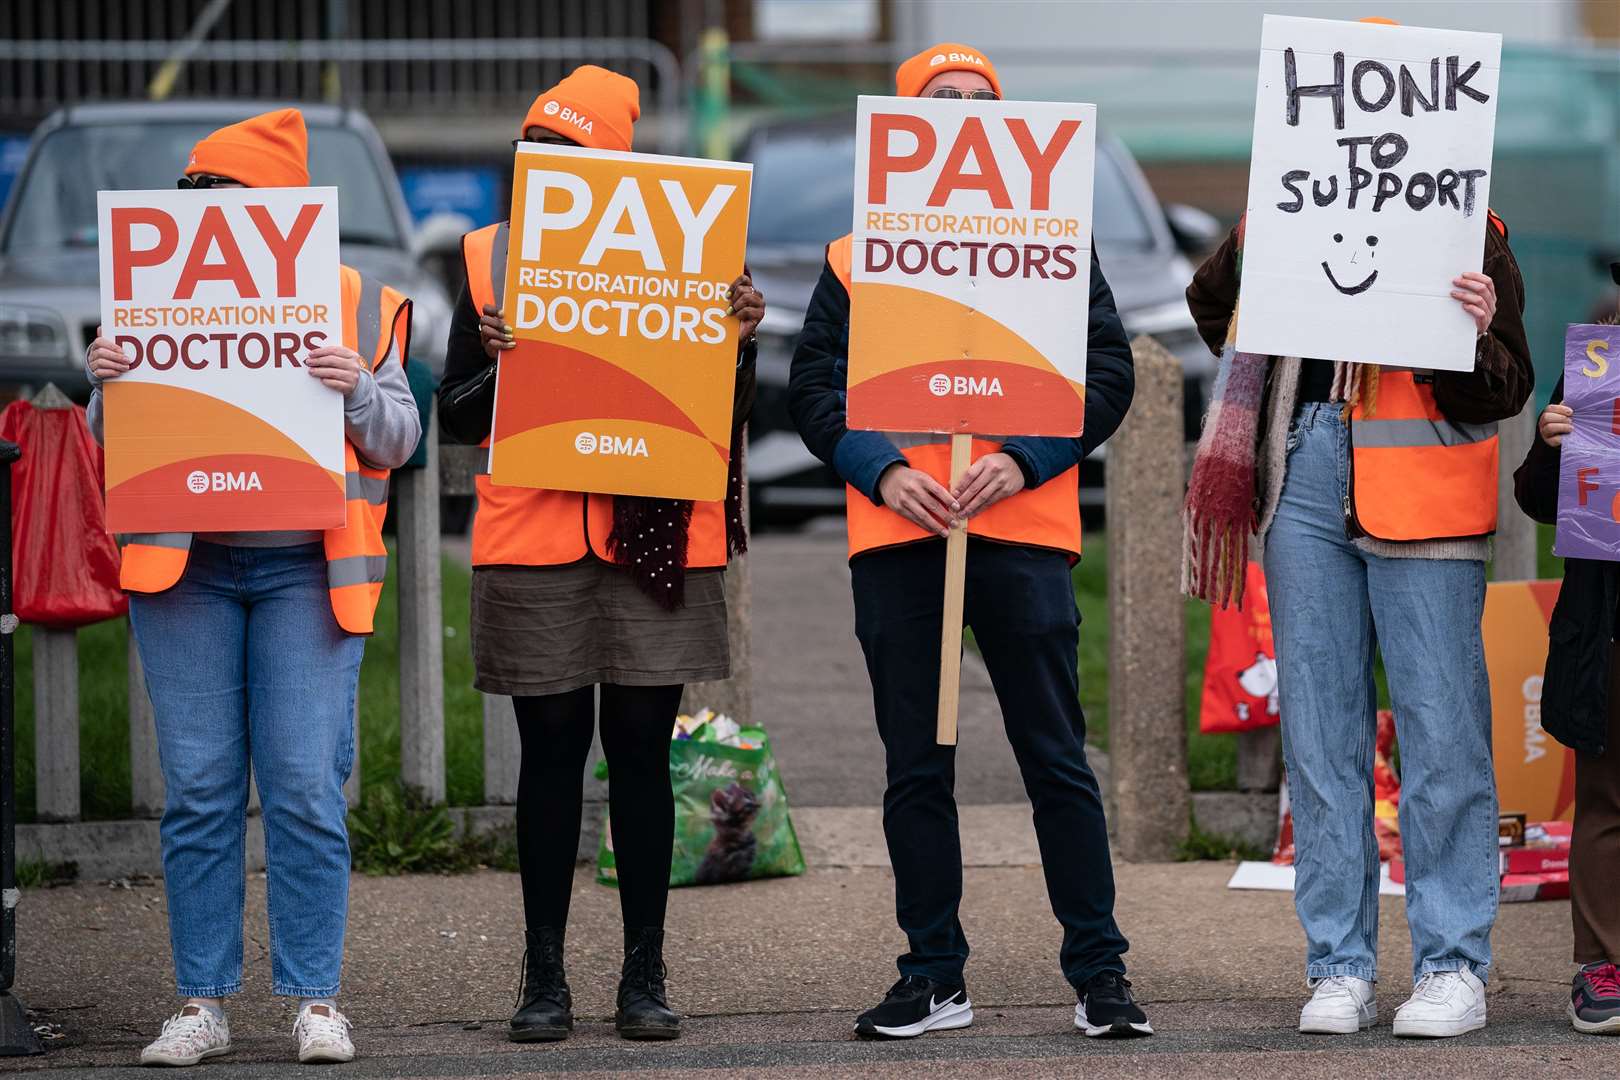 The Government has been locked in a series of disputes with unions over pay and working conditions in the NHS since last year, resulting in a wave of strike action across the health service (PA)